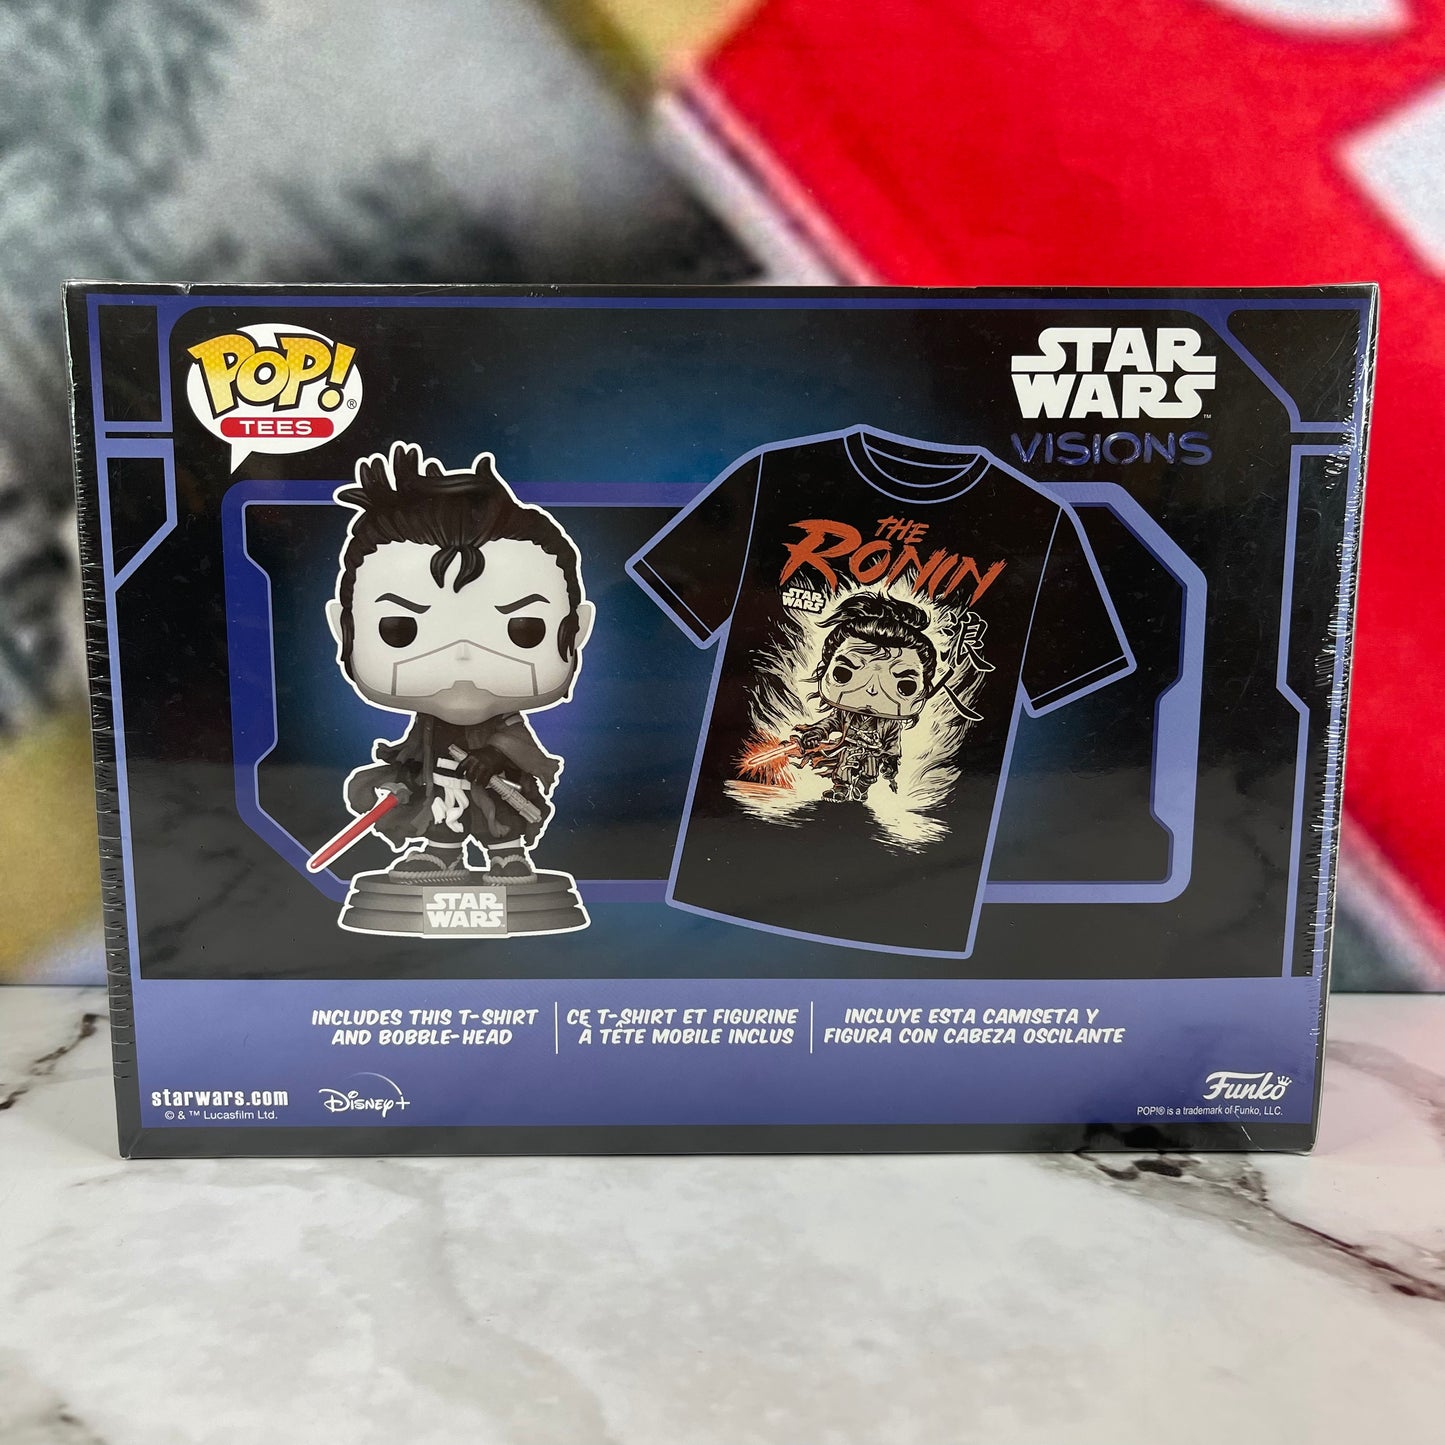 Funko Pop! Star Wars Visions The Ronin Pop & T-Shirt Target Exclusive